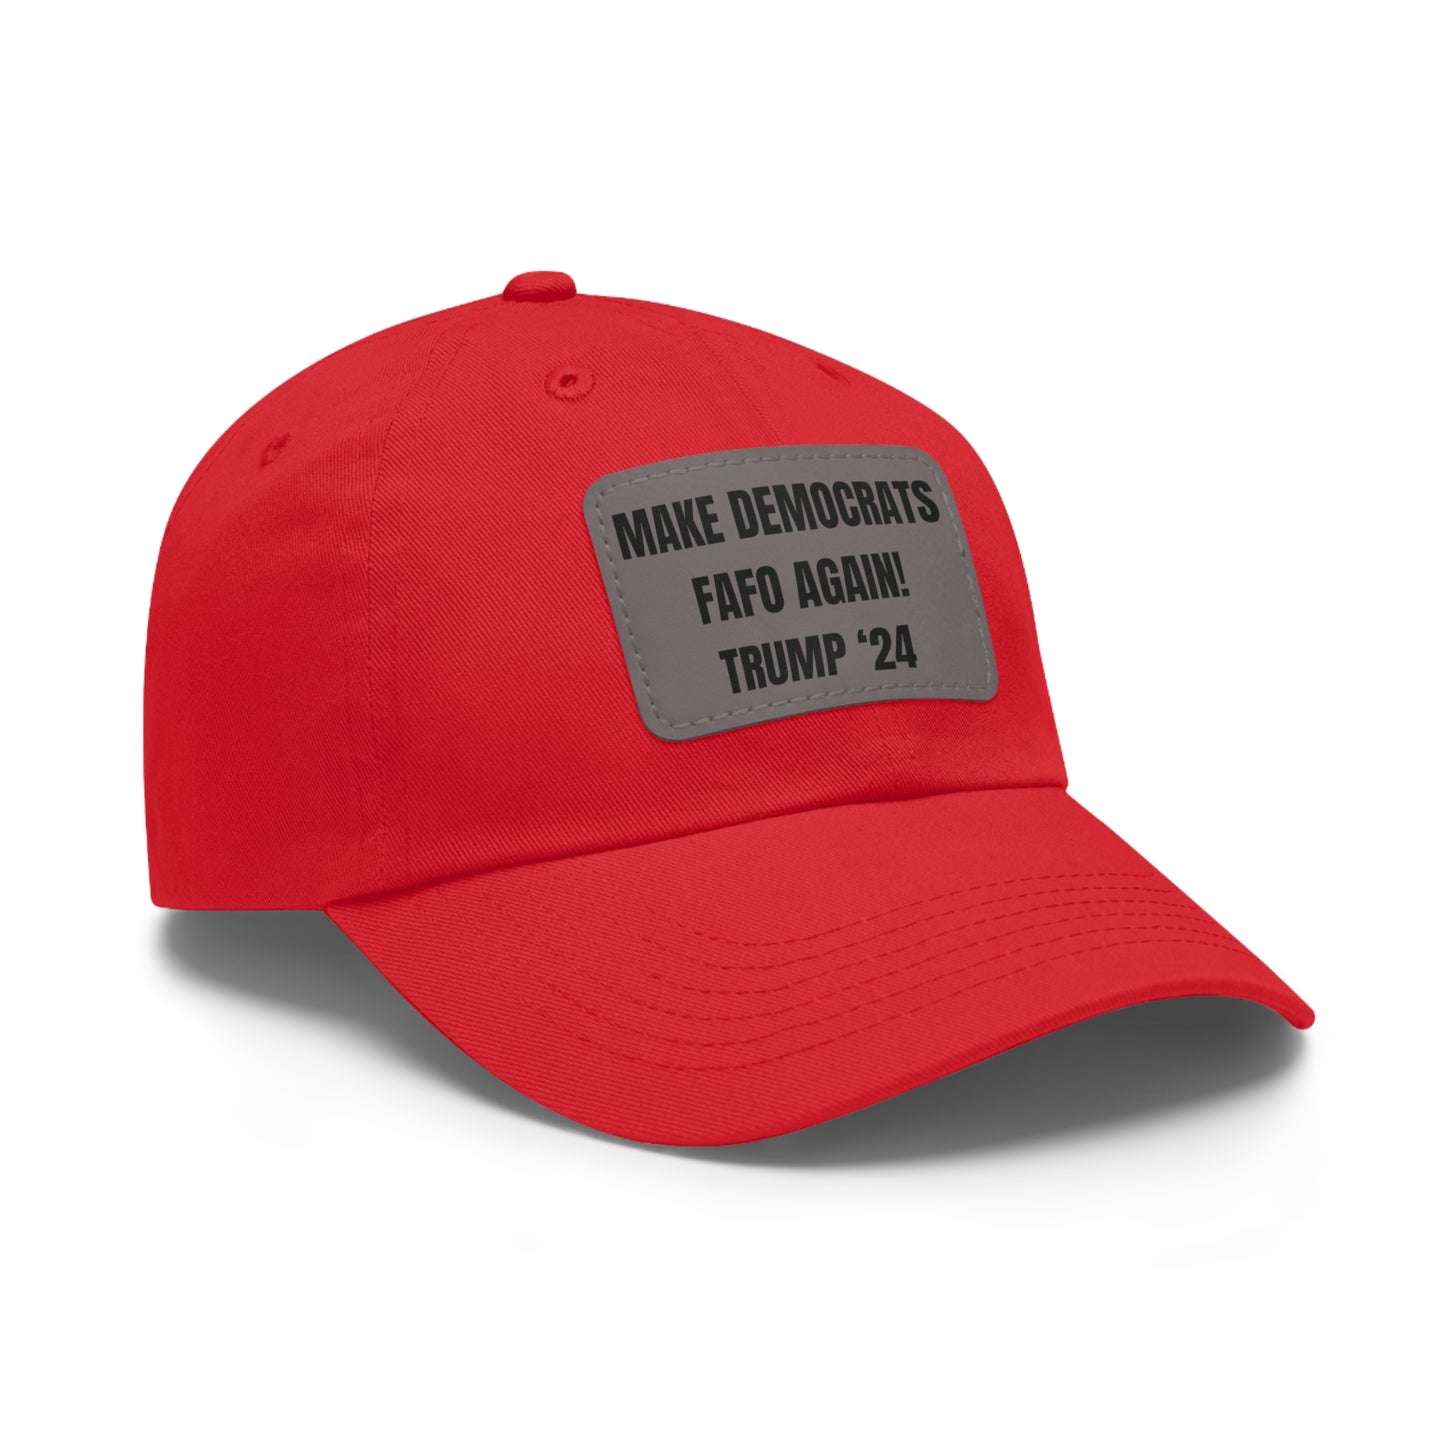 "MAKE DEMOCRATS FAFO AGAIN! TRUMP '24" Leather Patch Hat